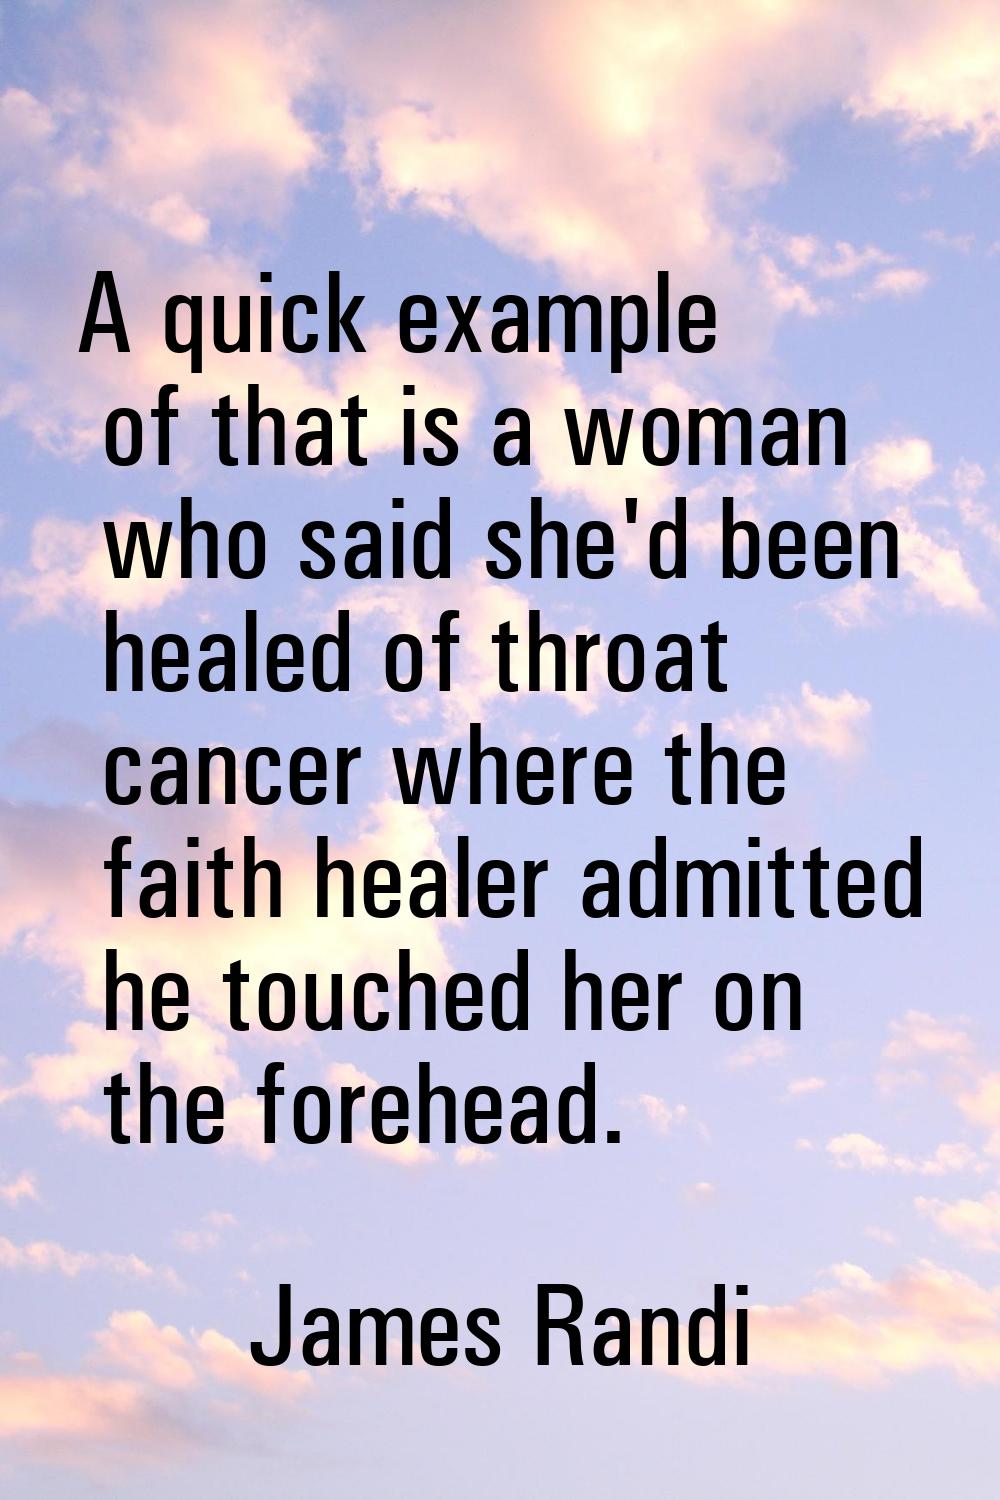 A quick example of that is a woman who said she'd been healed of throat cancer where the faith heal